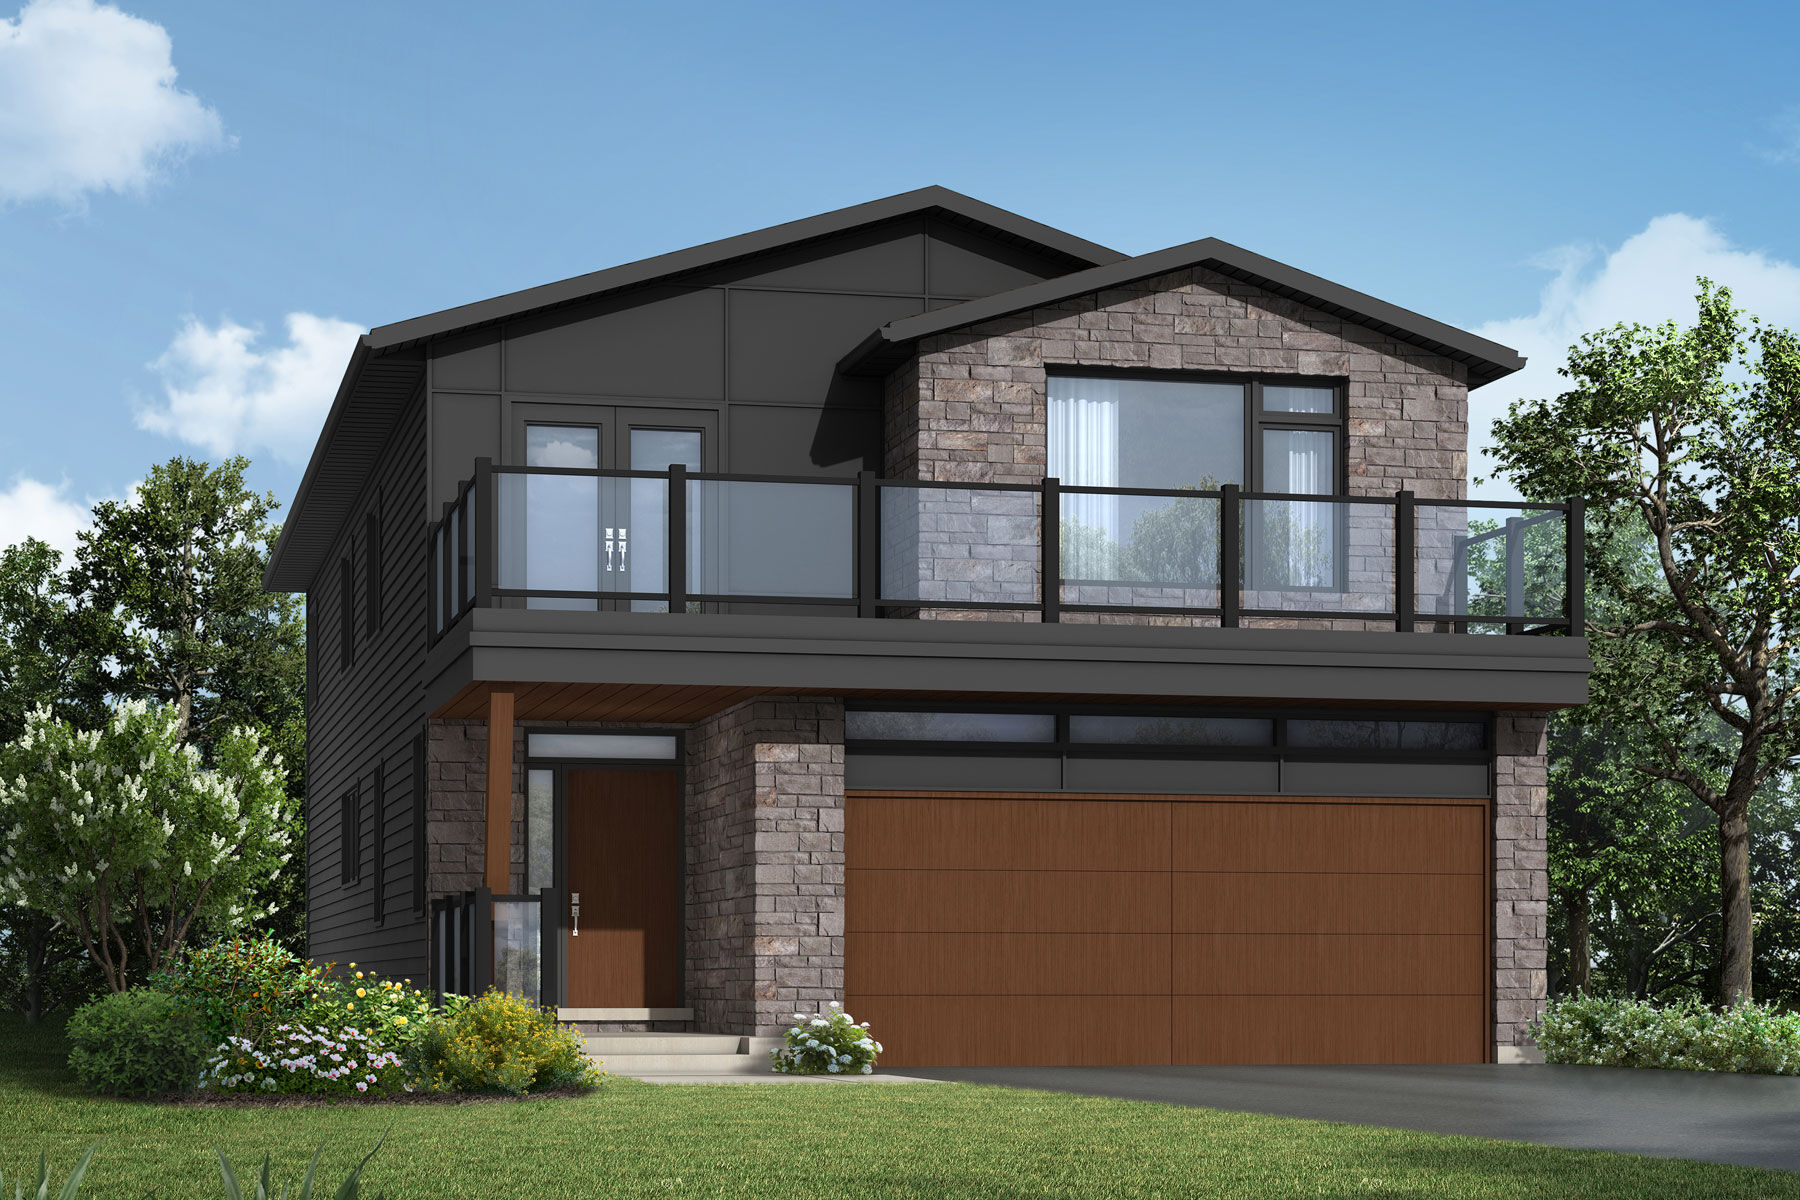 A Contemporary style single family home with a double car garage.